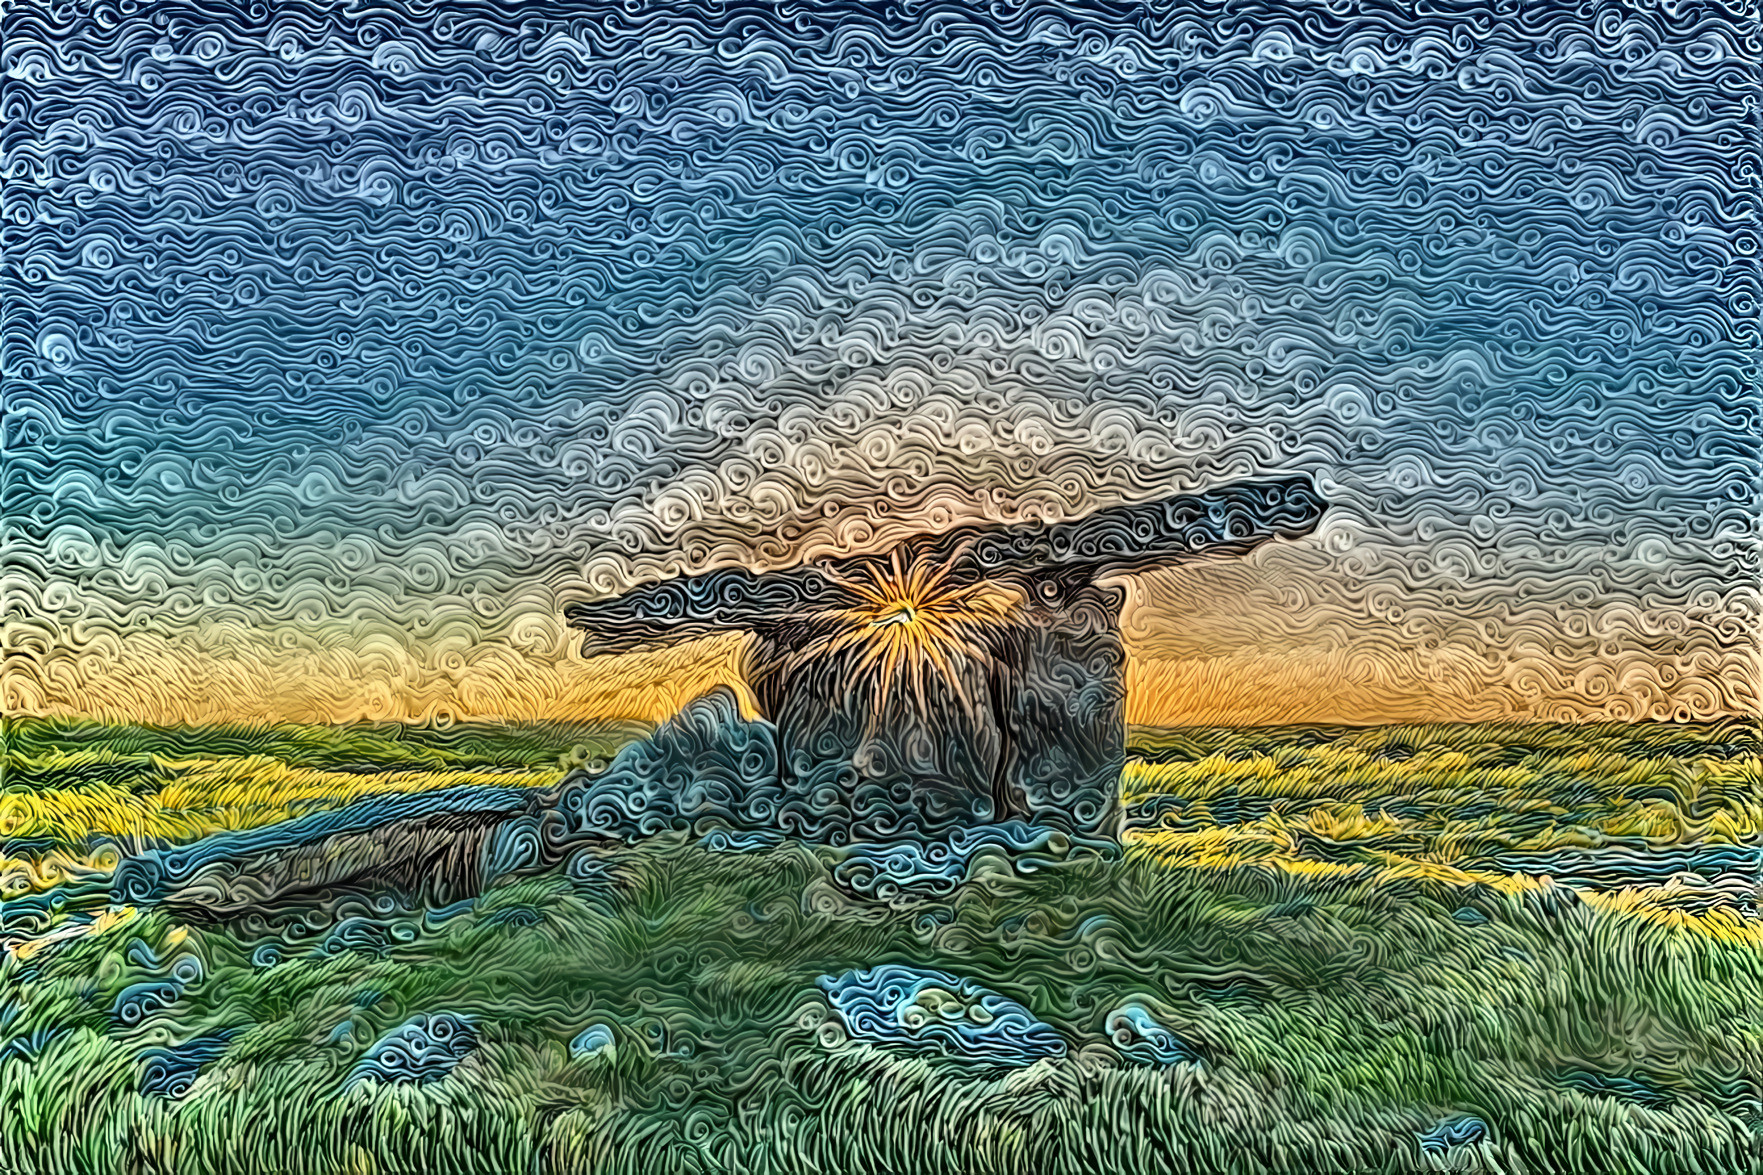 "Sunset at Poulnabrone Dolmen" - source photo by Todor Tilev